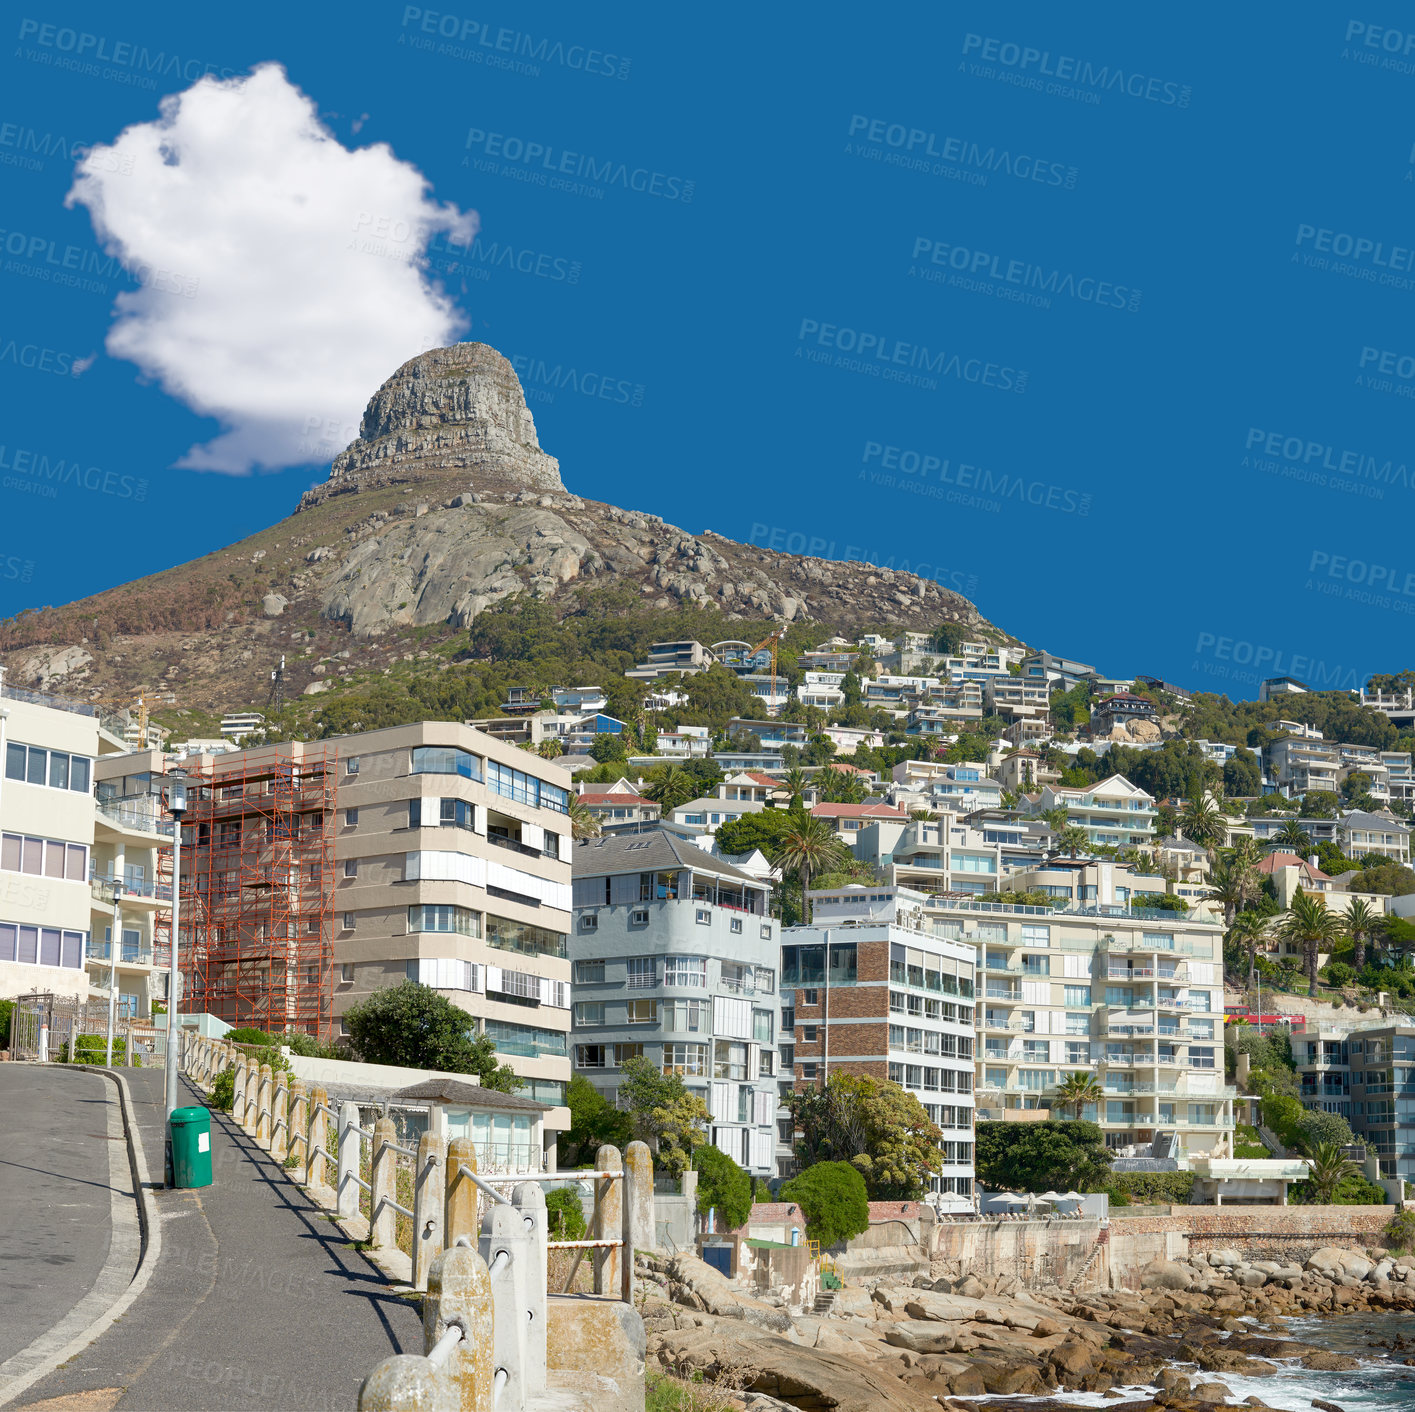 Buy stock photo Panorama of Lions Head seen from Sea Point, Cape Town, South Africa. A view of the peak of the lion's head surrounded by modern buildings and greenery with a blue sky. A pathway along the side. 